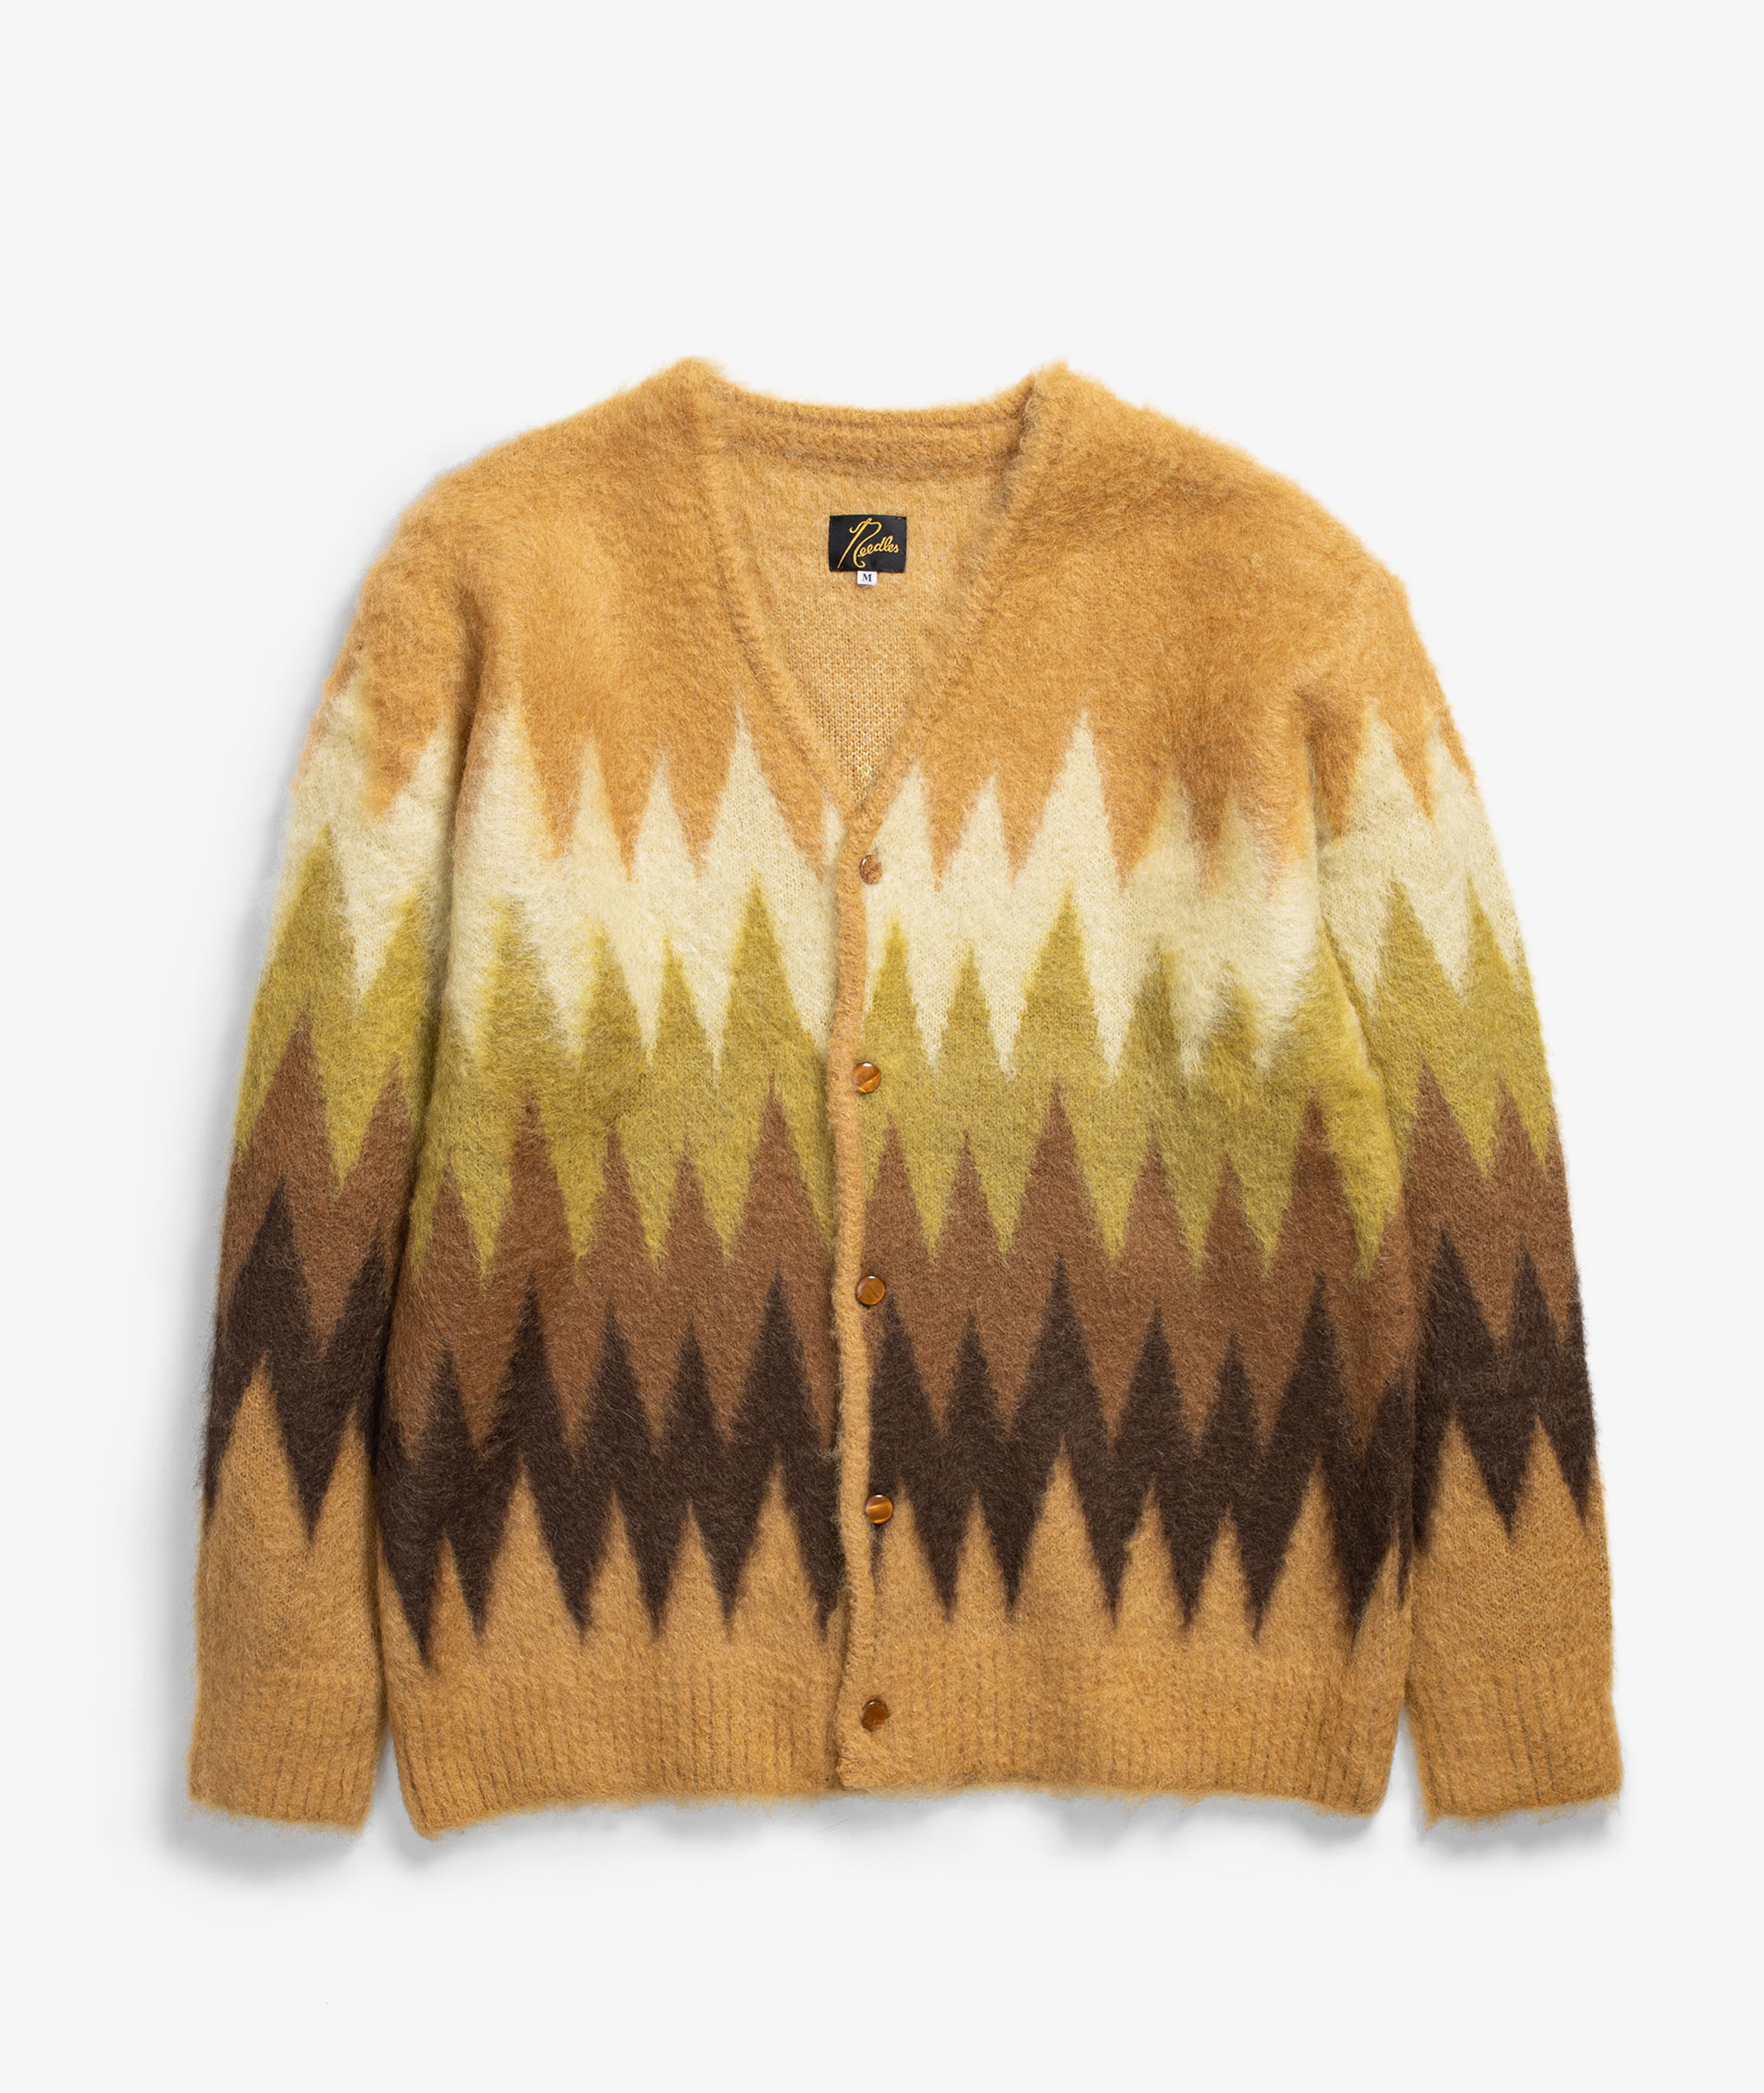 Norse Store | Shipping Worldwide - Needles Mohair Zigzag Cardigan 